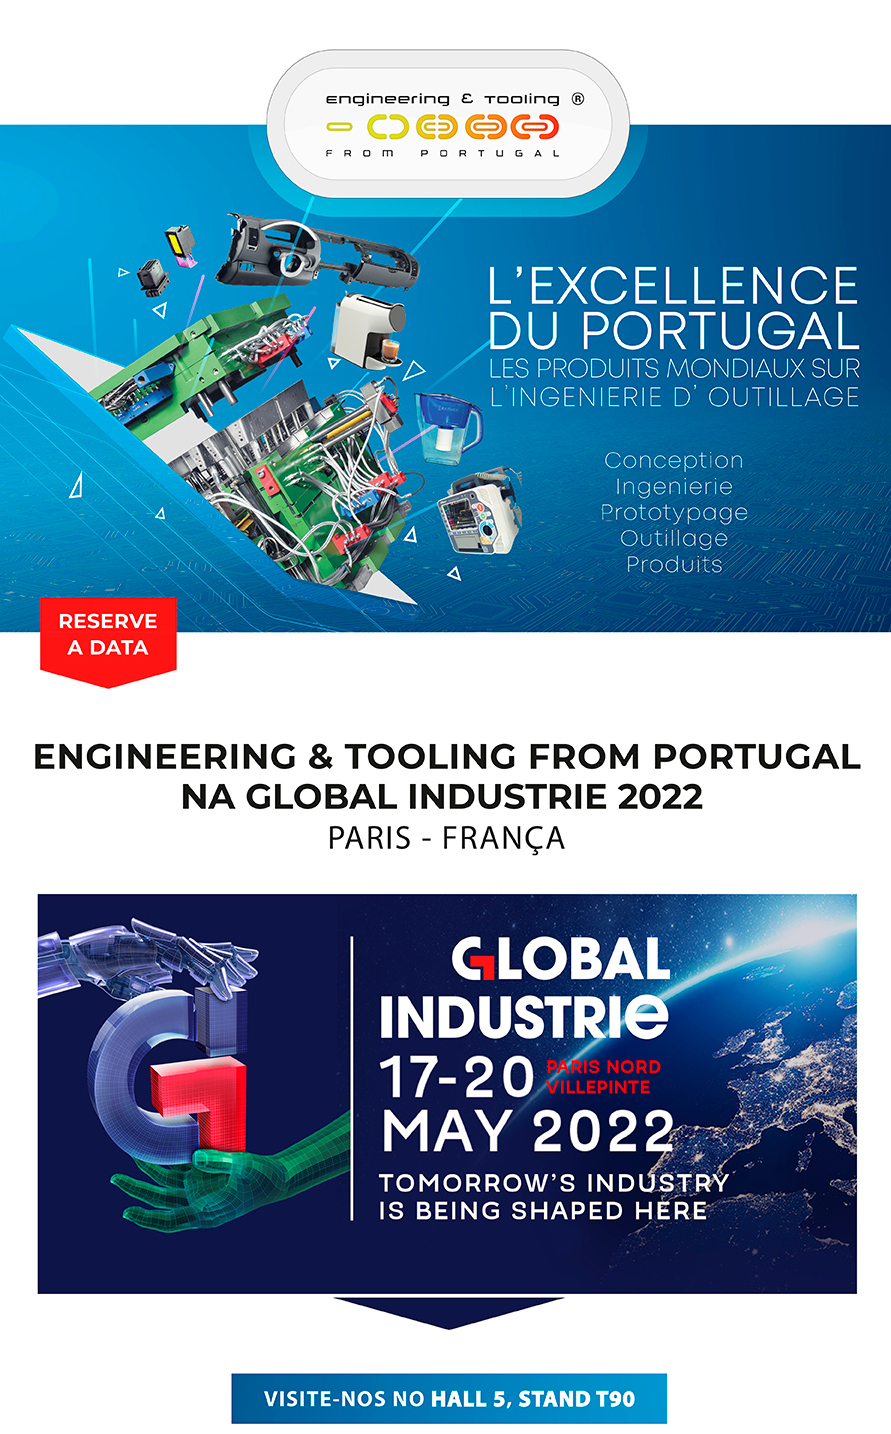 Engineering & Tooling from Portugal na Global Industrie 2022